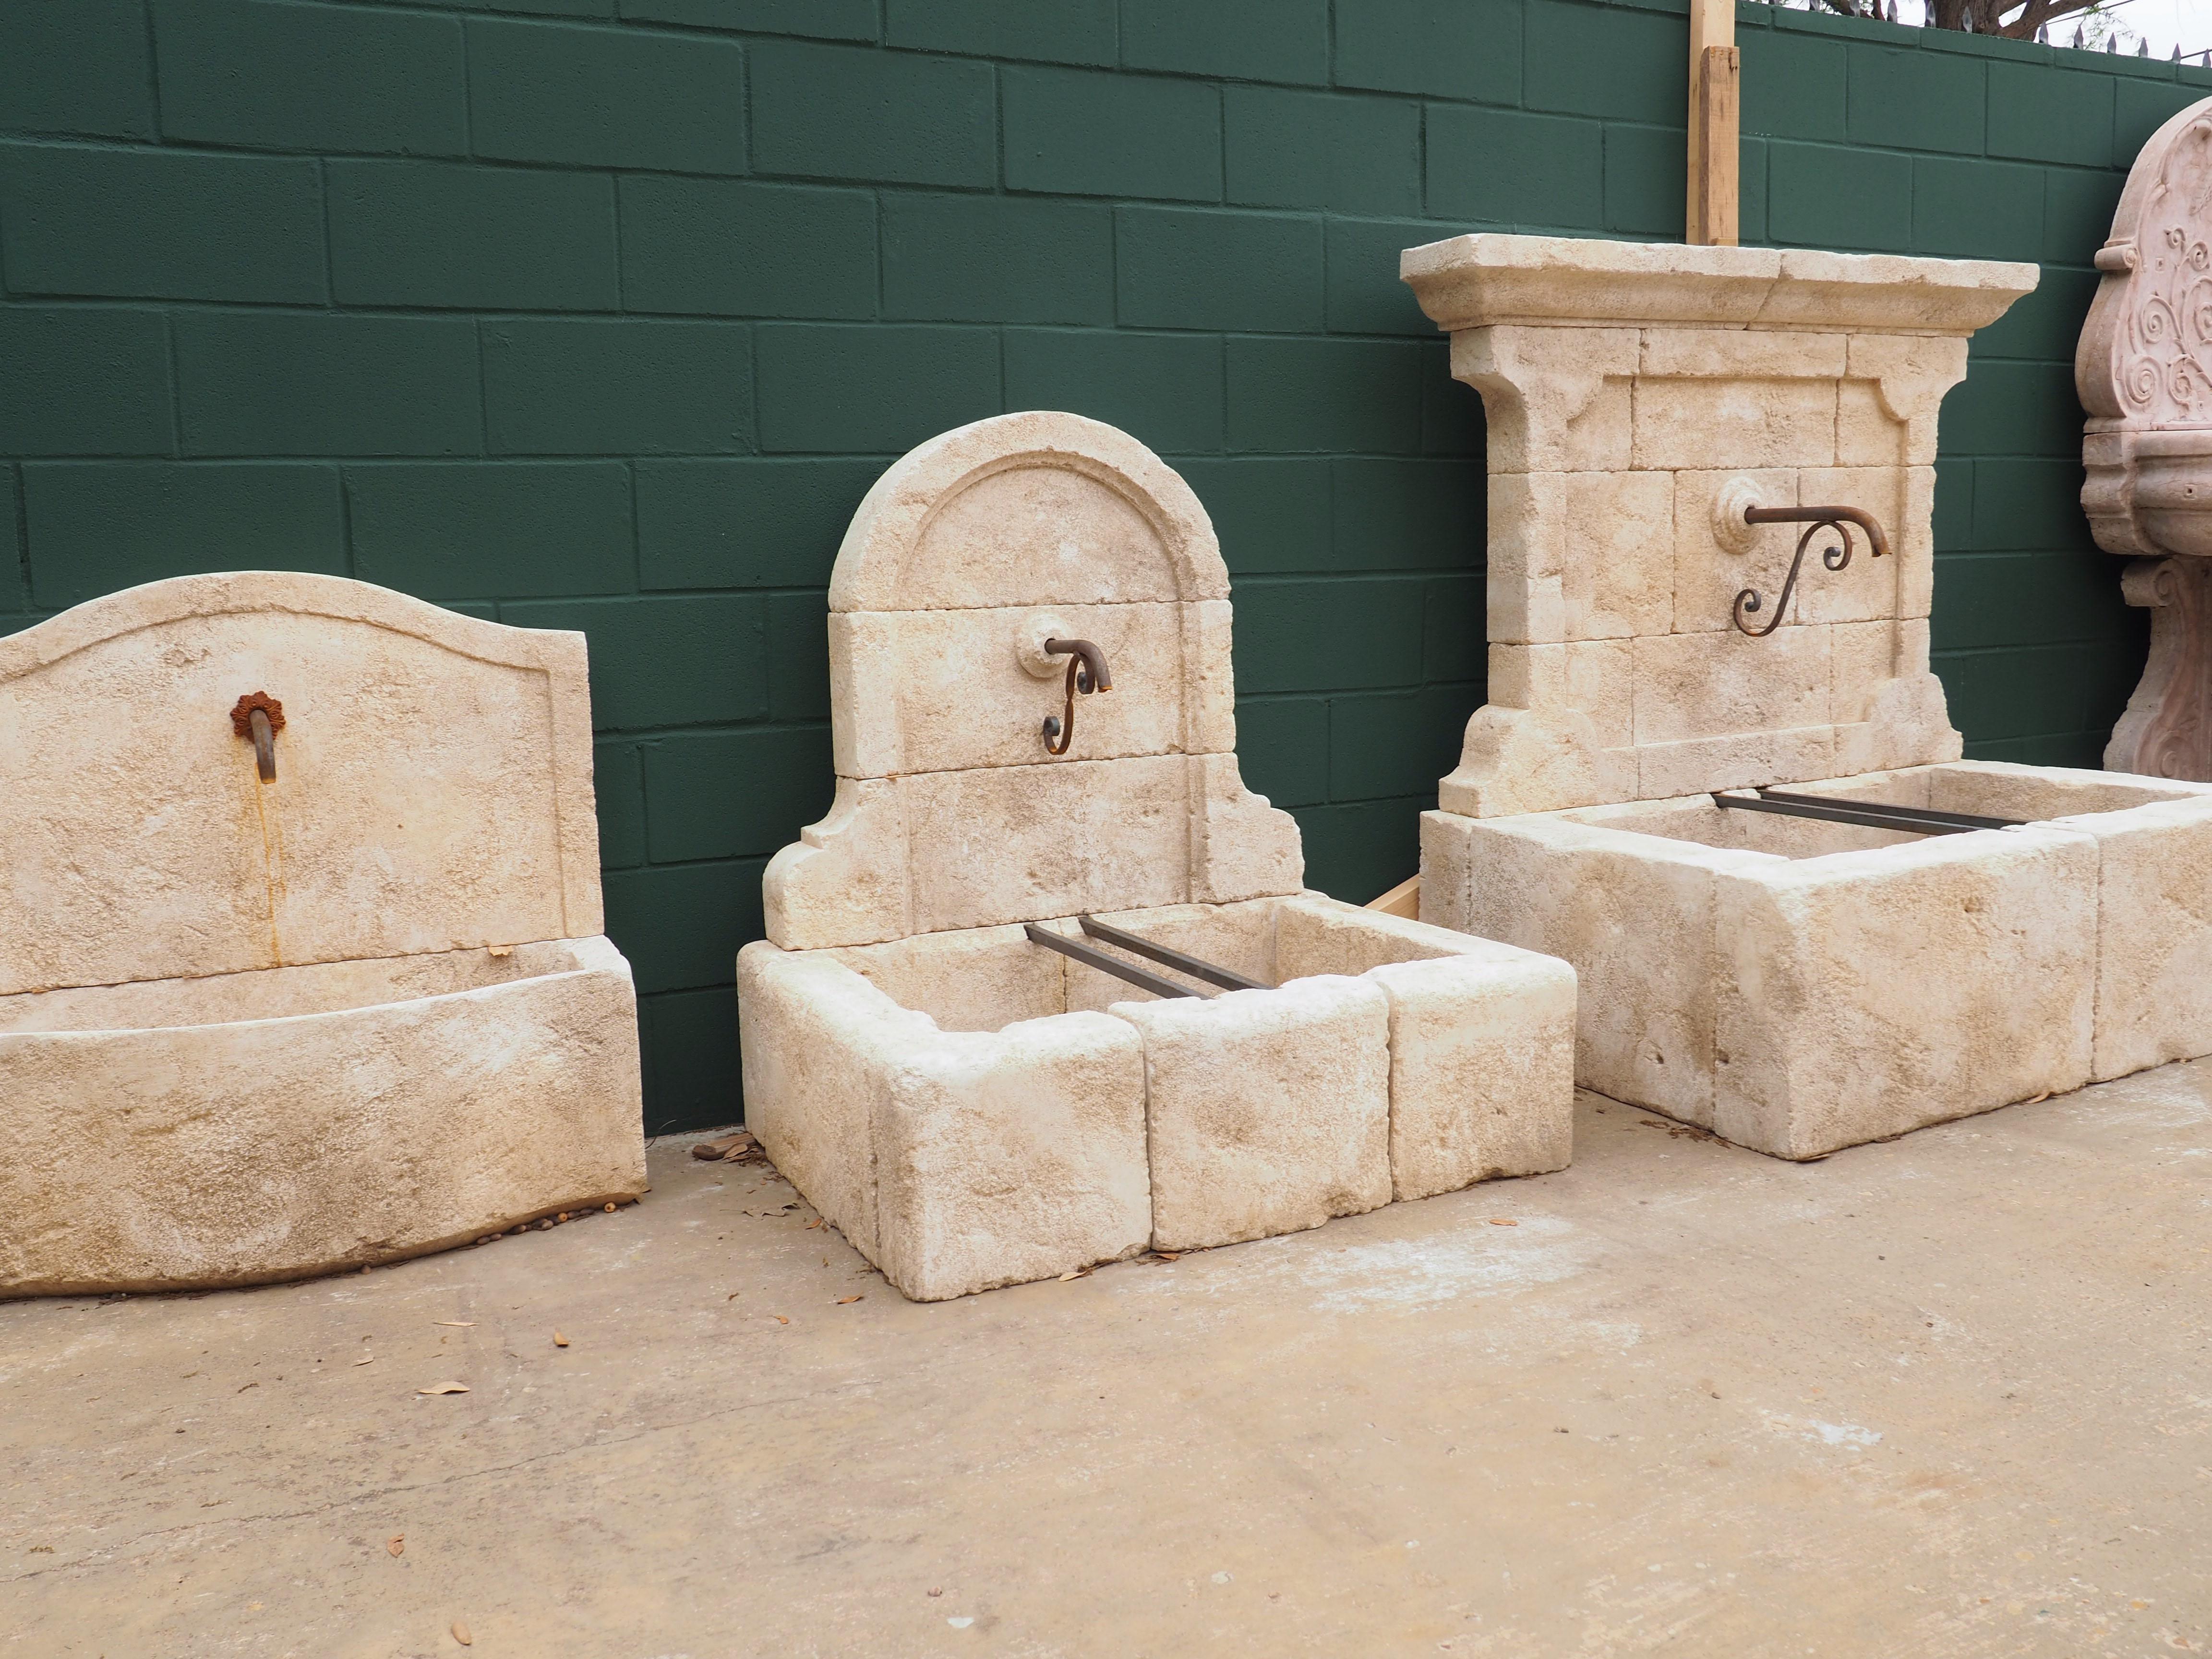 From Provence, France, this small limestone wall fountain has a high arched top with ogee carvings at the base of the wall. A thick molding with a chamfered edge adorns the interior of the wall, which is comprised of three stones. The middle stone